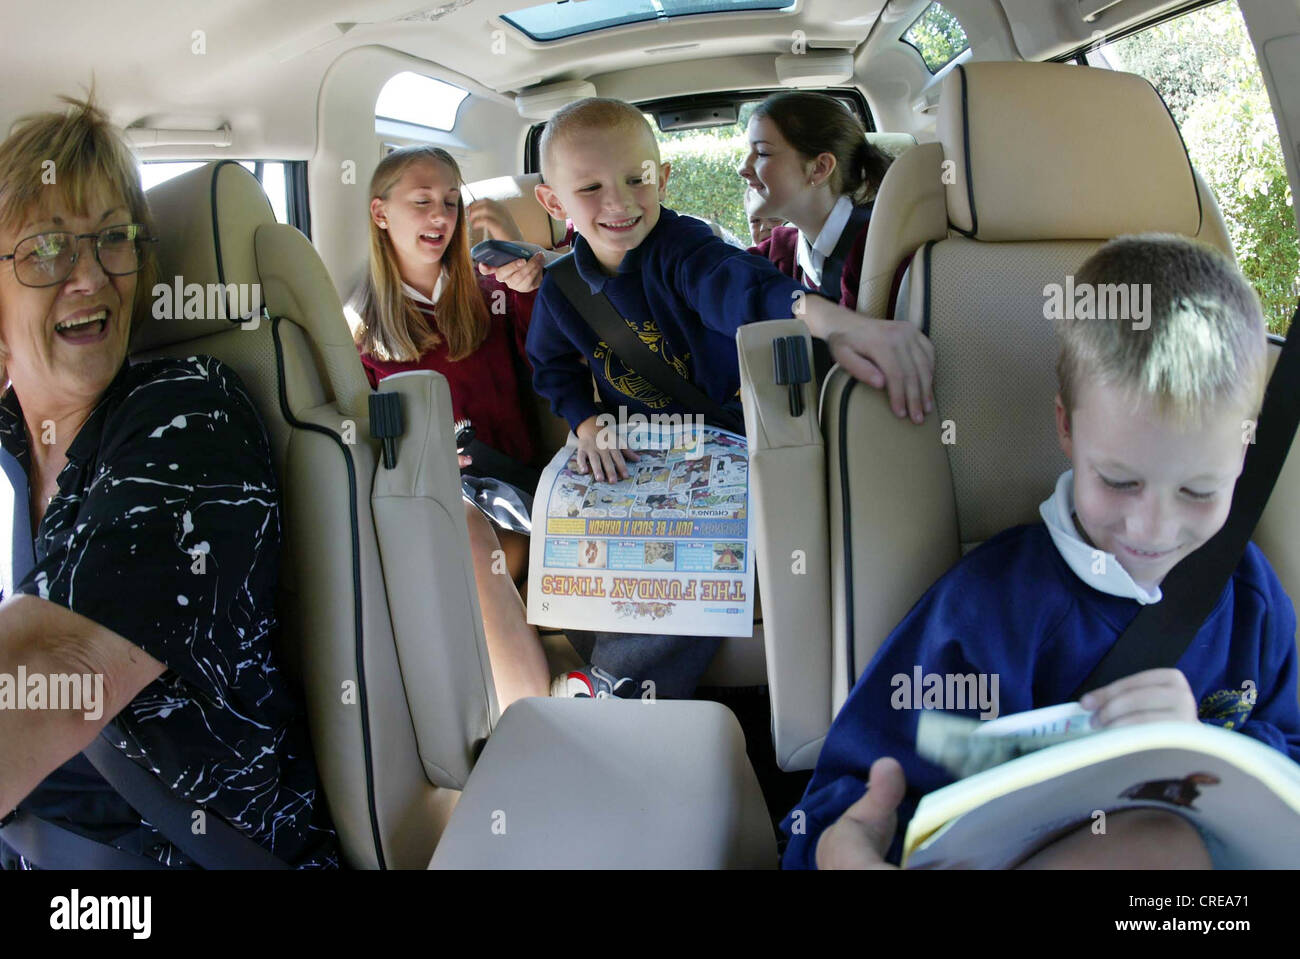 Parent driving car for early morning children's schoolrun, Sussex, United Kingdom Stock Photo